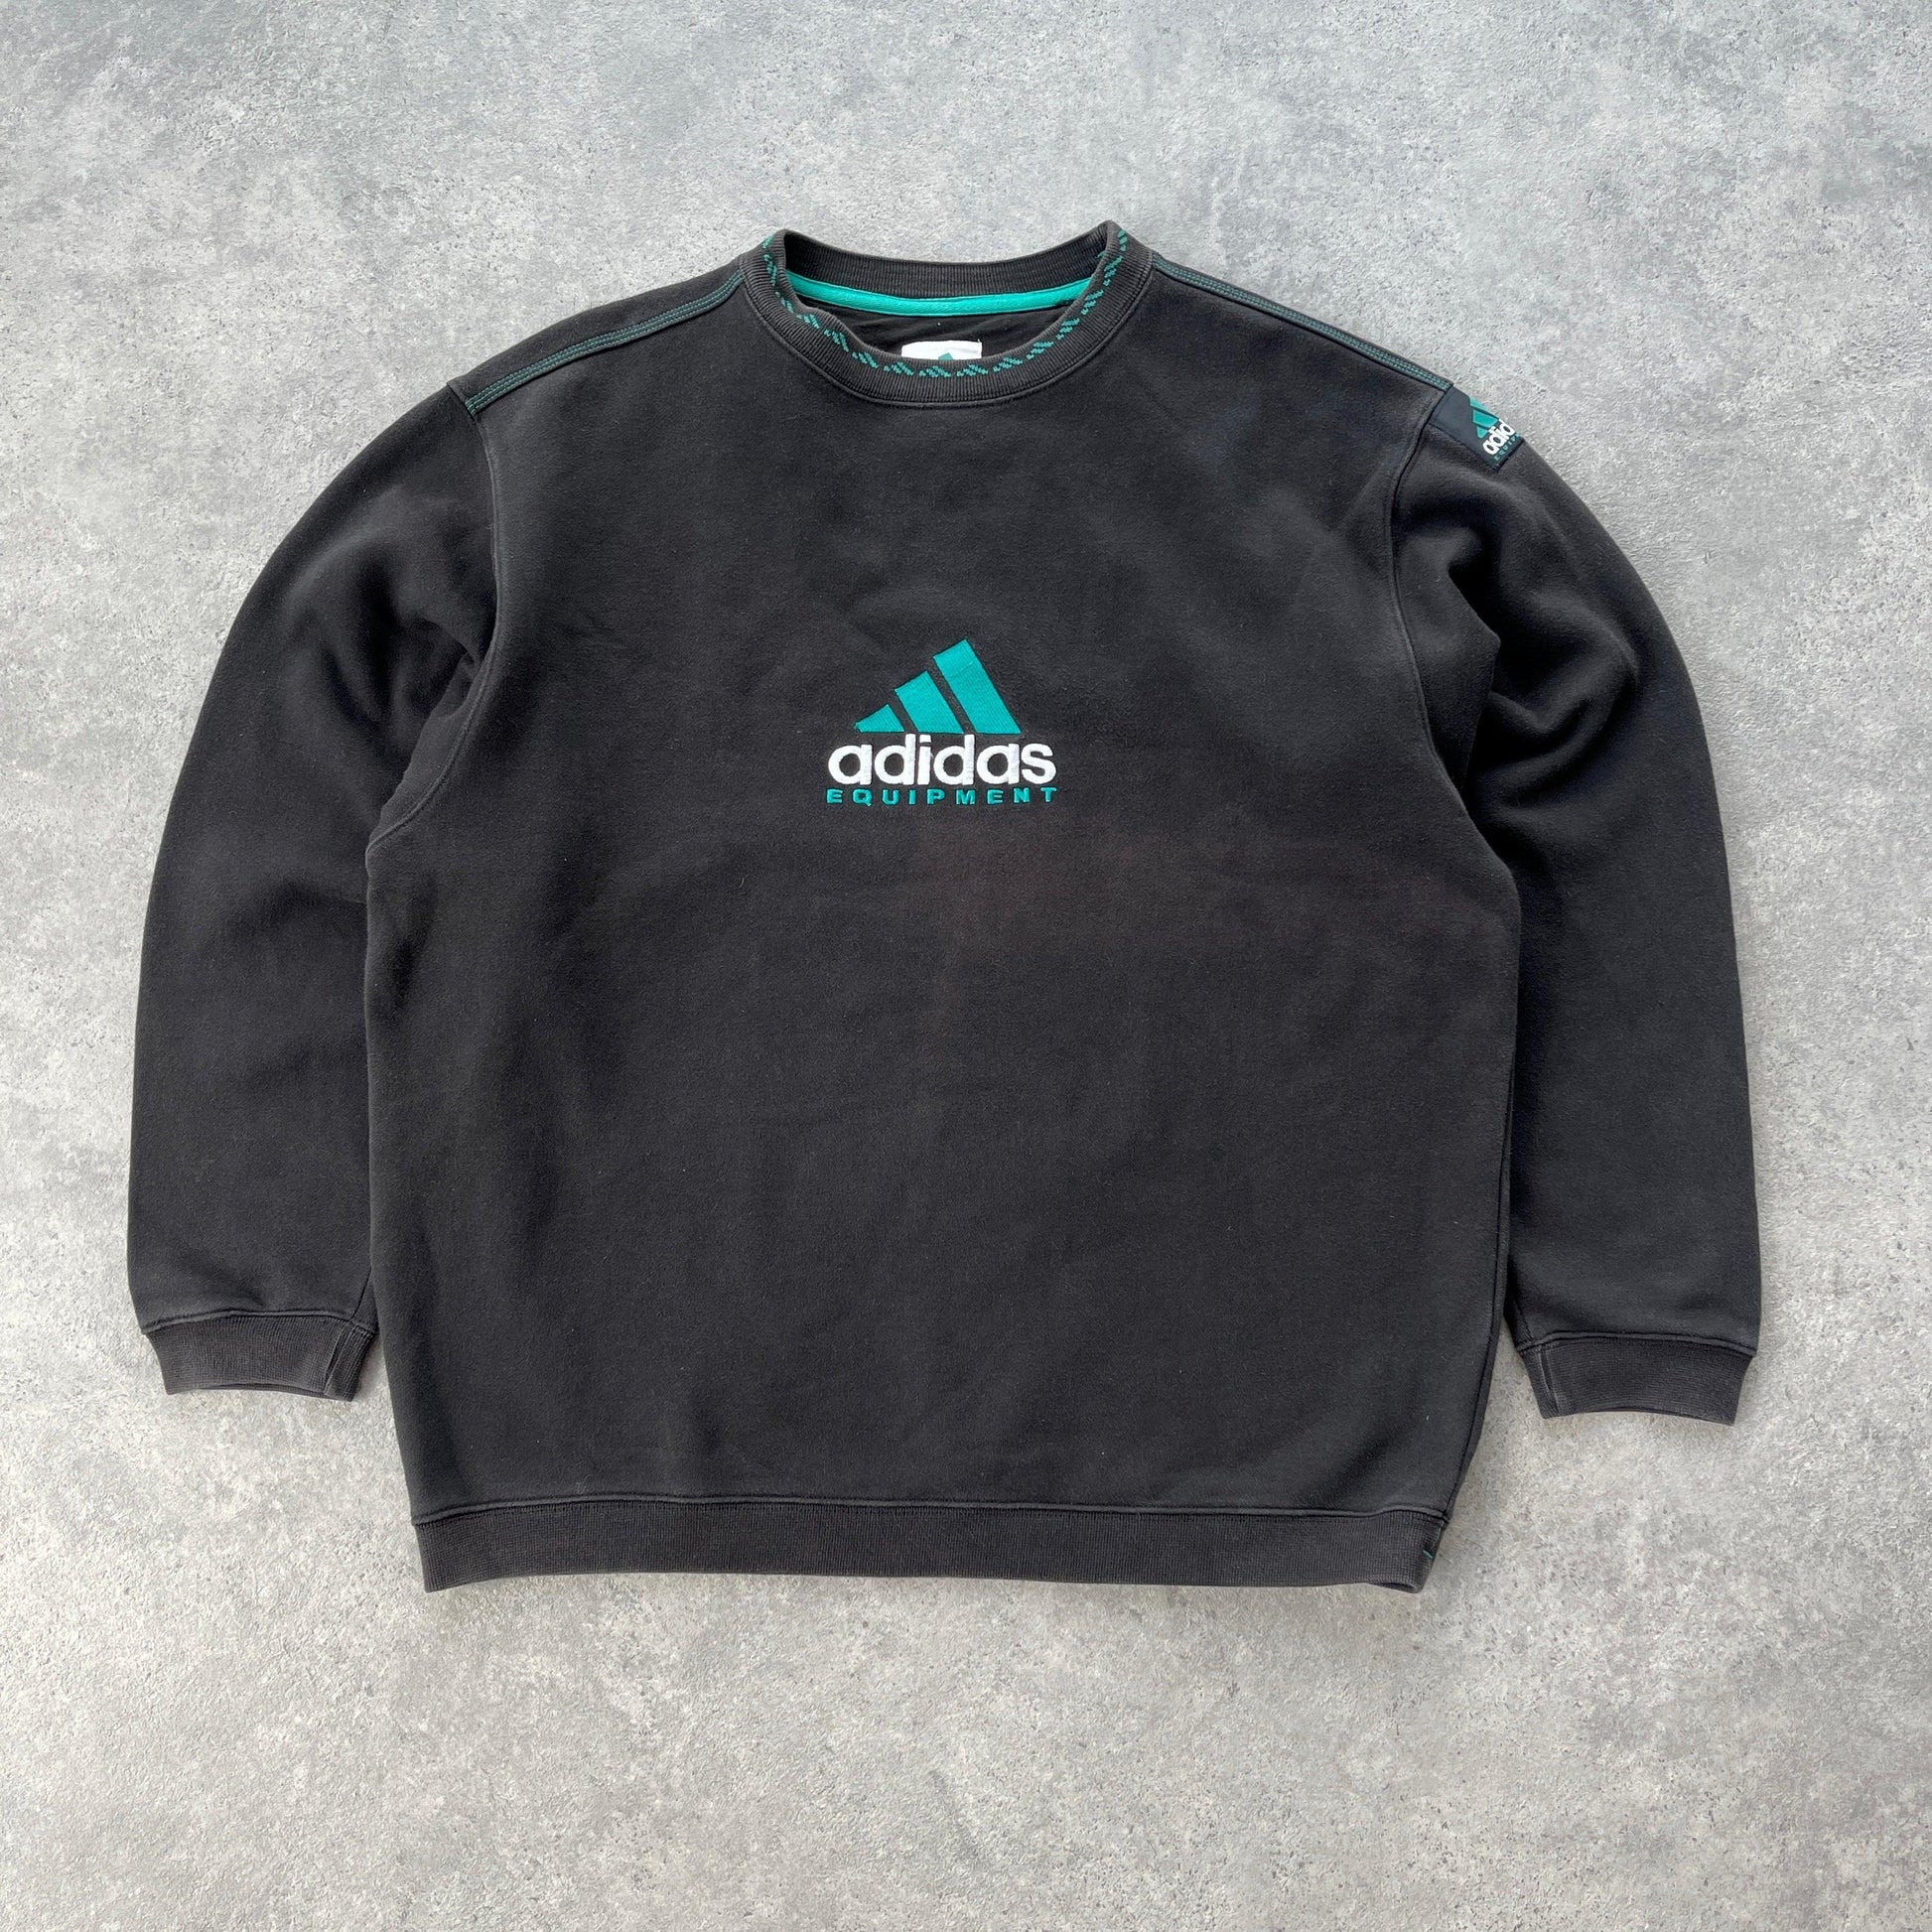 Adidas Equipment 1990s heavyweight embroidered sweatshirt (L) - Known Source